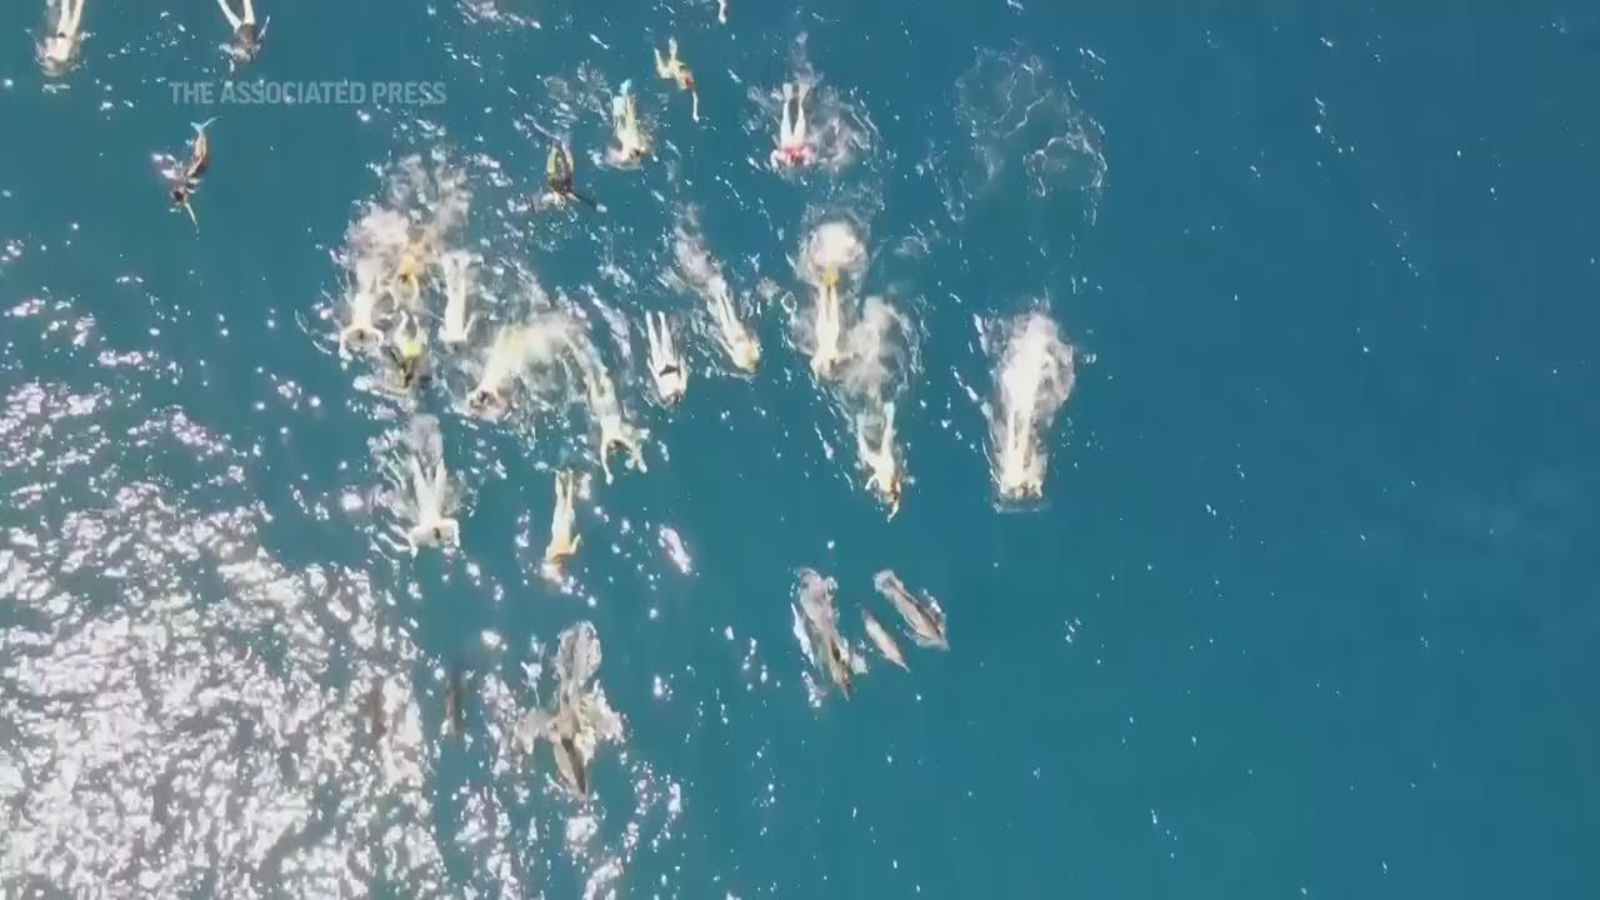 Hawaii authorities say video shows 33 swimmers harassing wild pod of dolphins